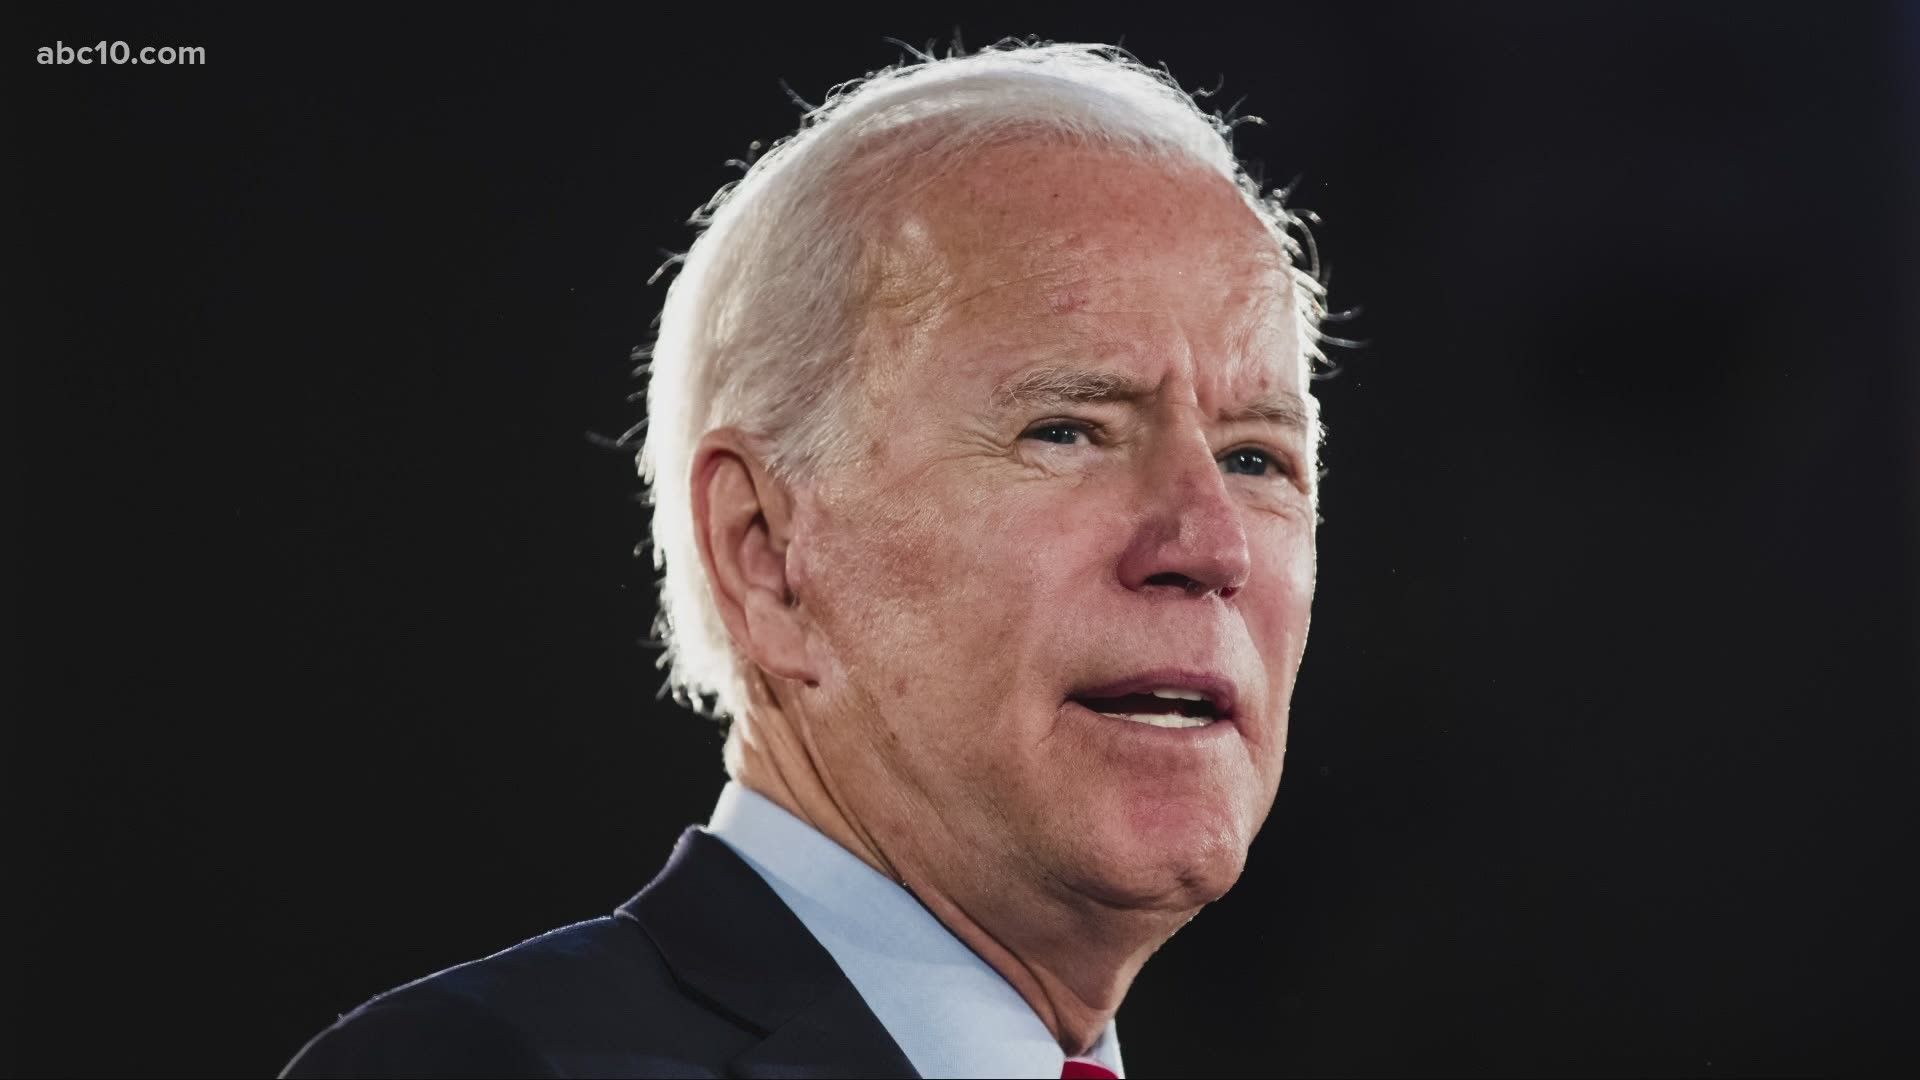 Why aren't we seeing more of Joe Biden on the campaign trail